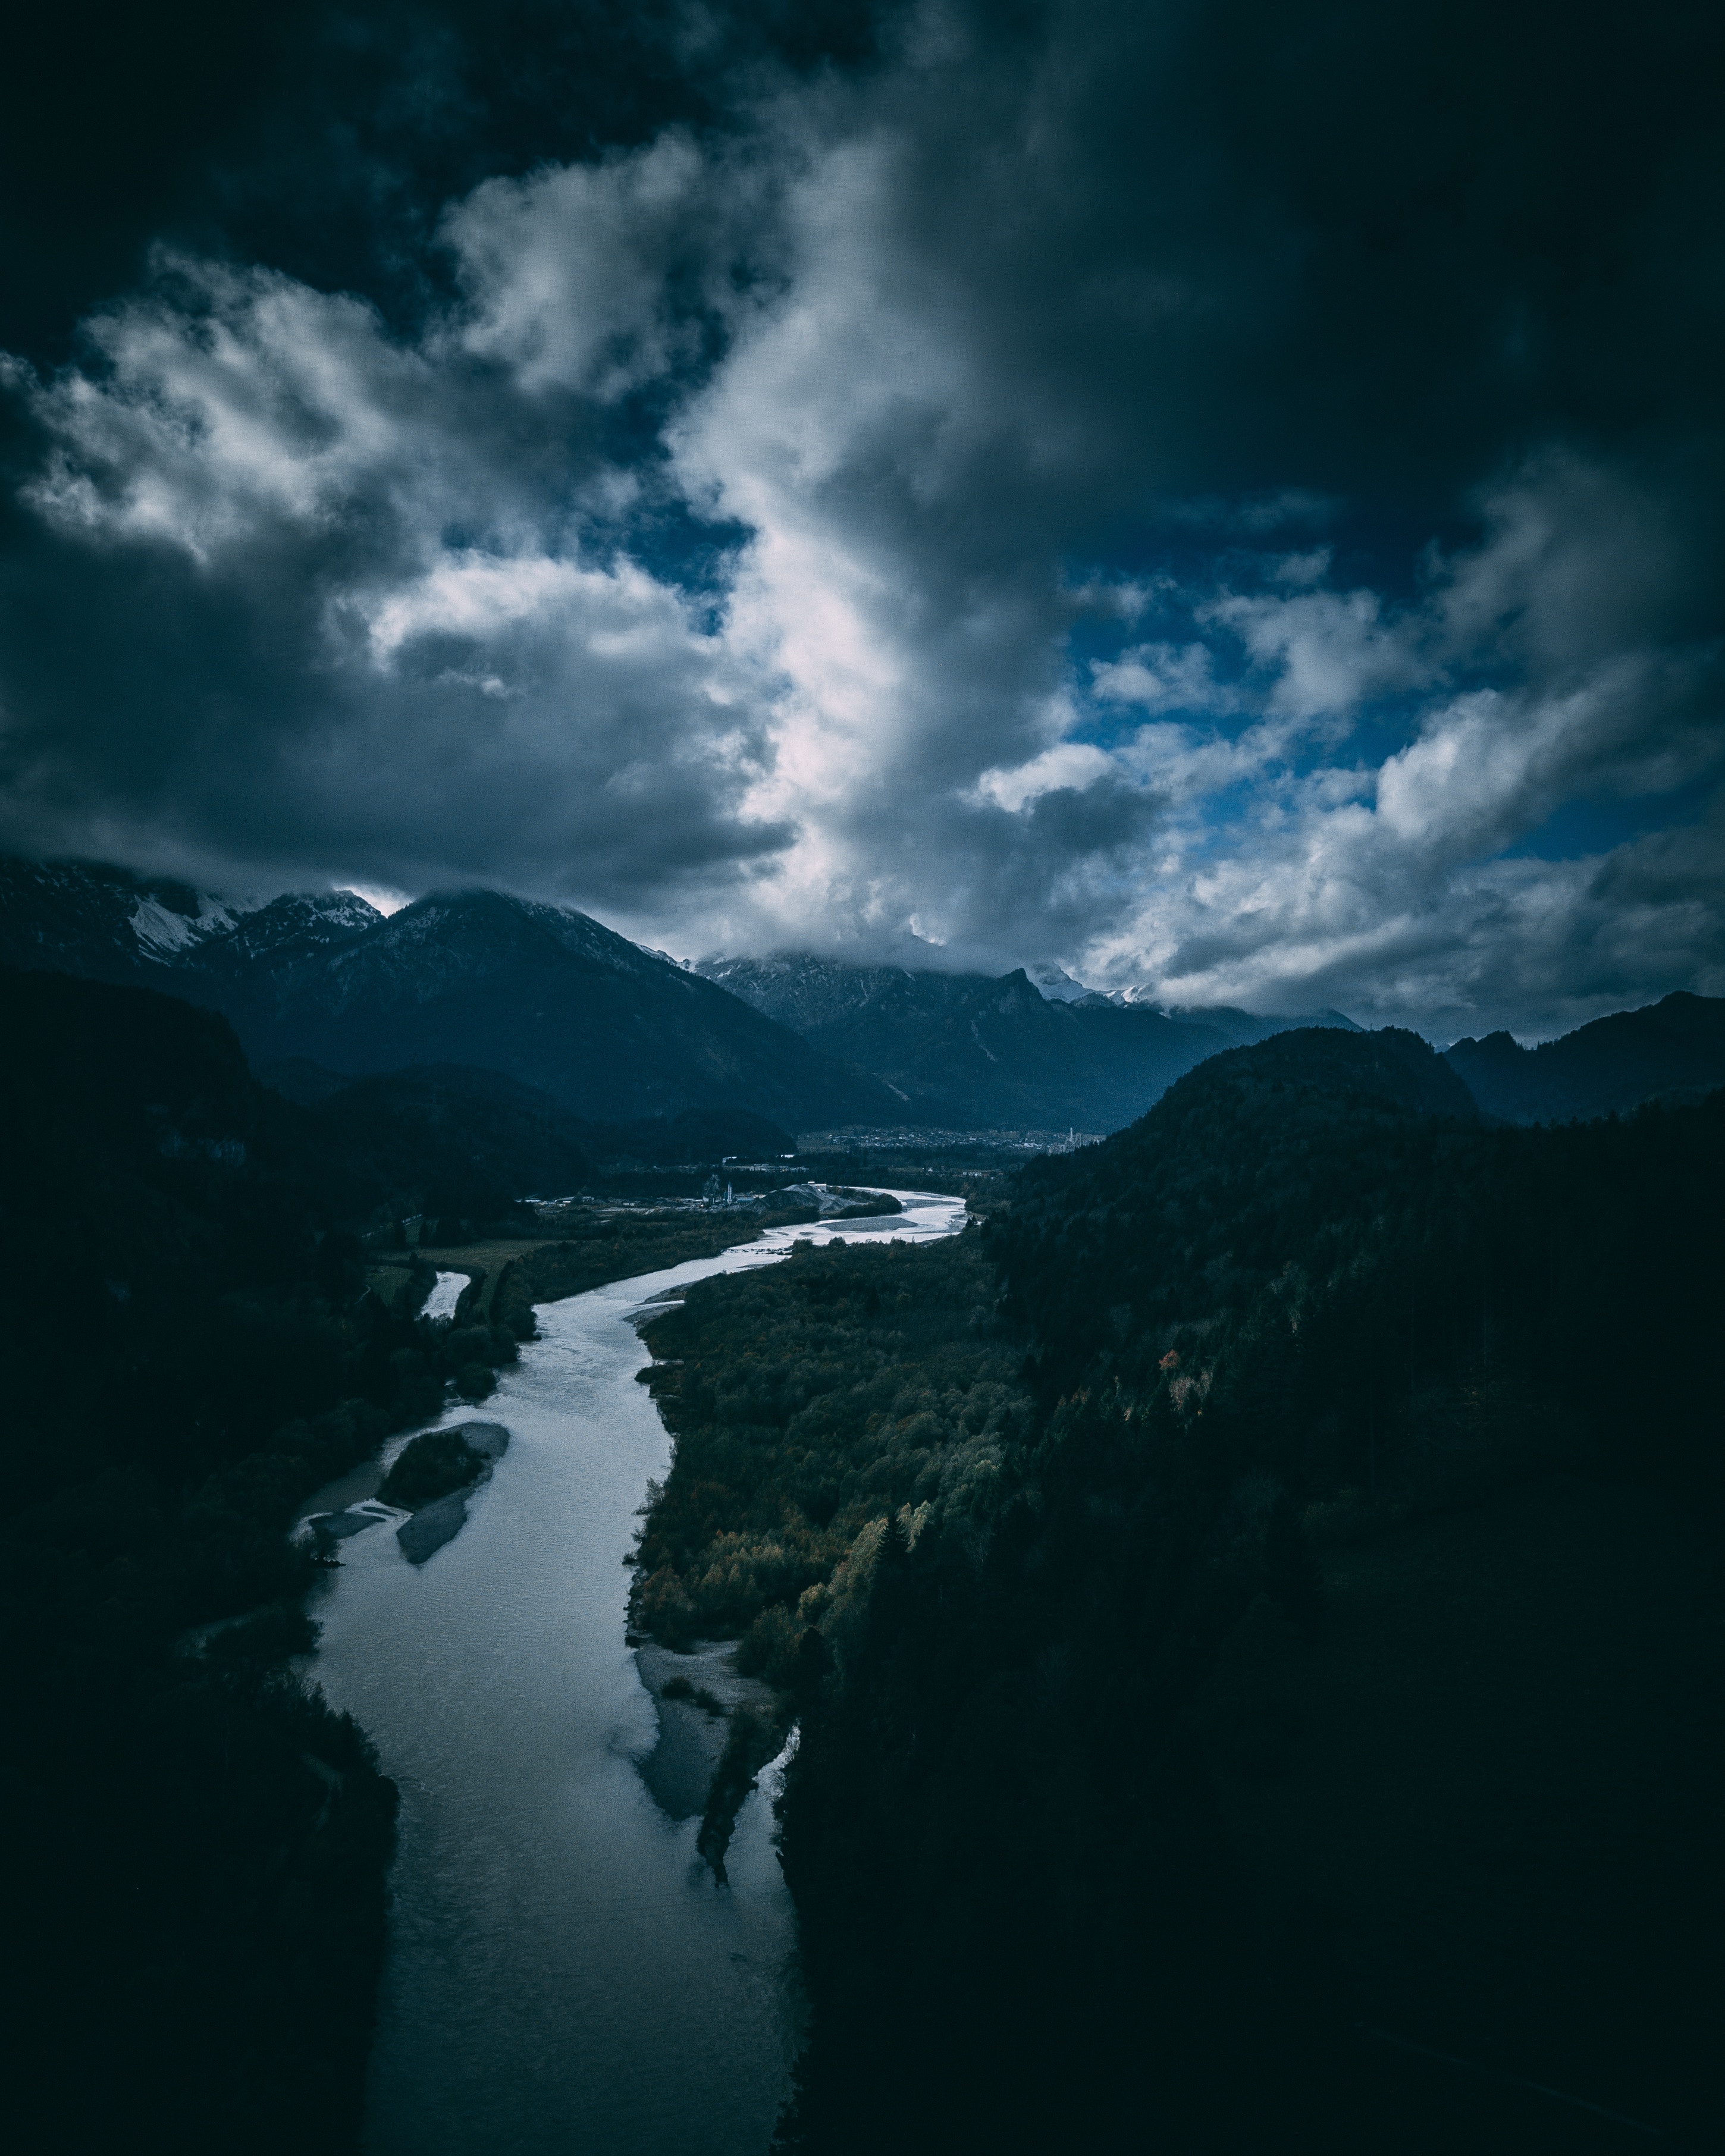 germany, trees, sky, clouds, nature, rivers, mountains, view from above